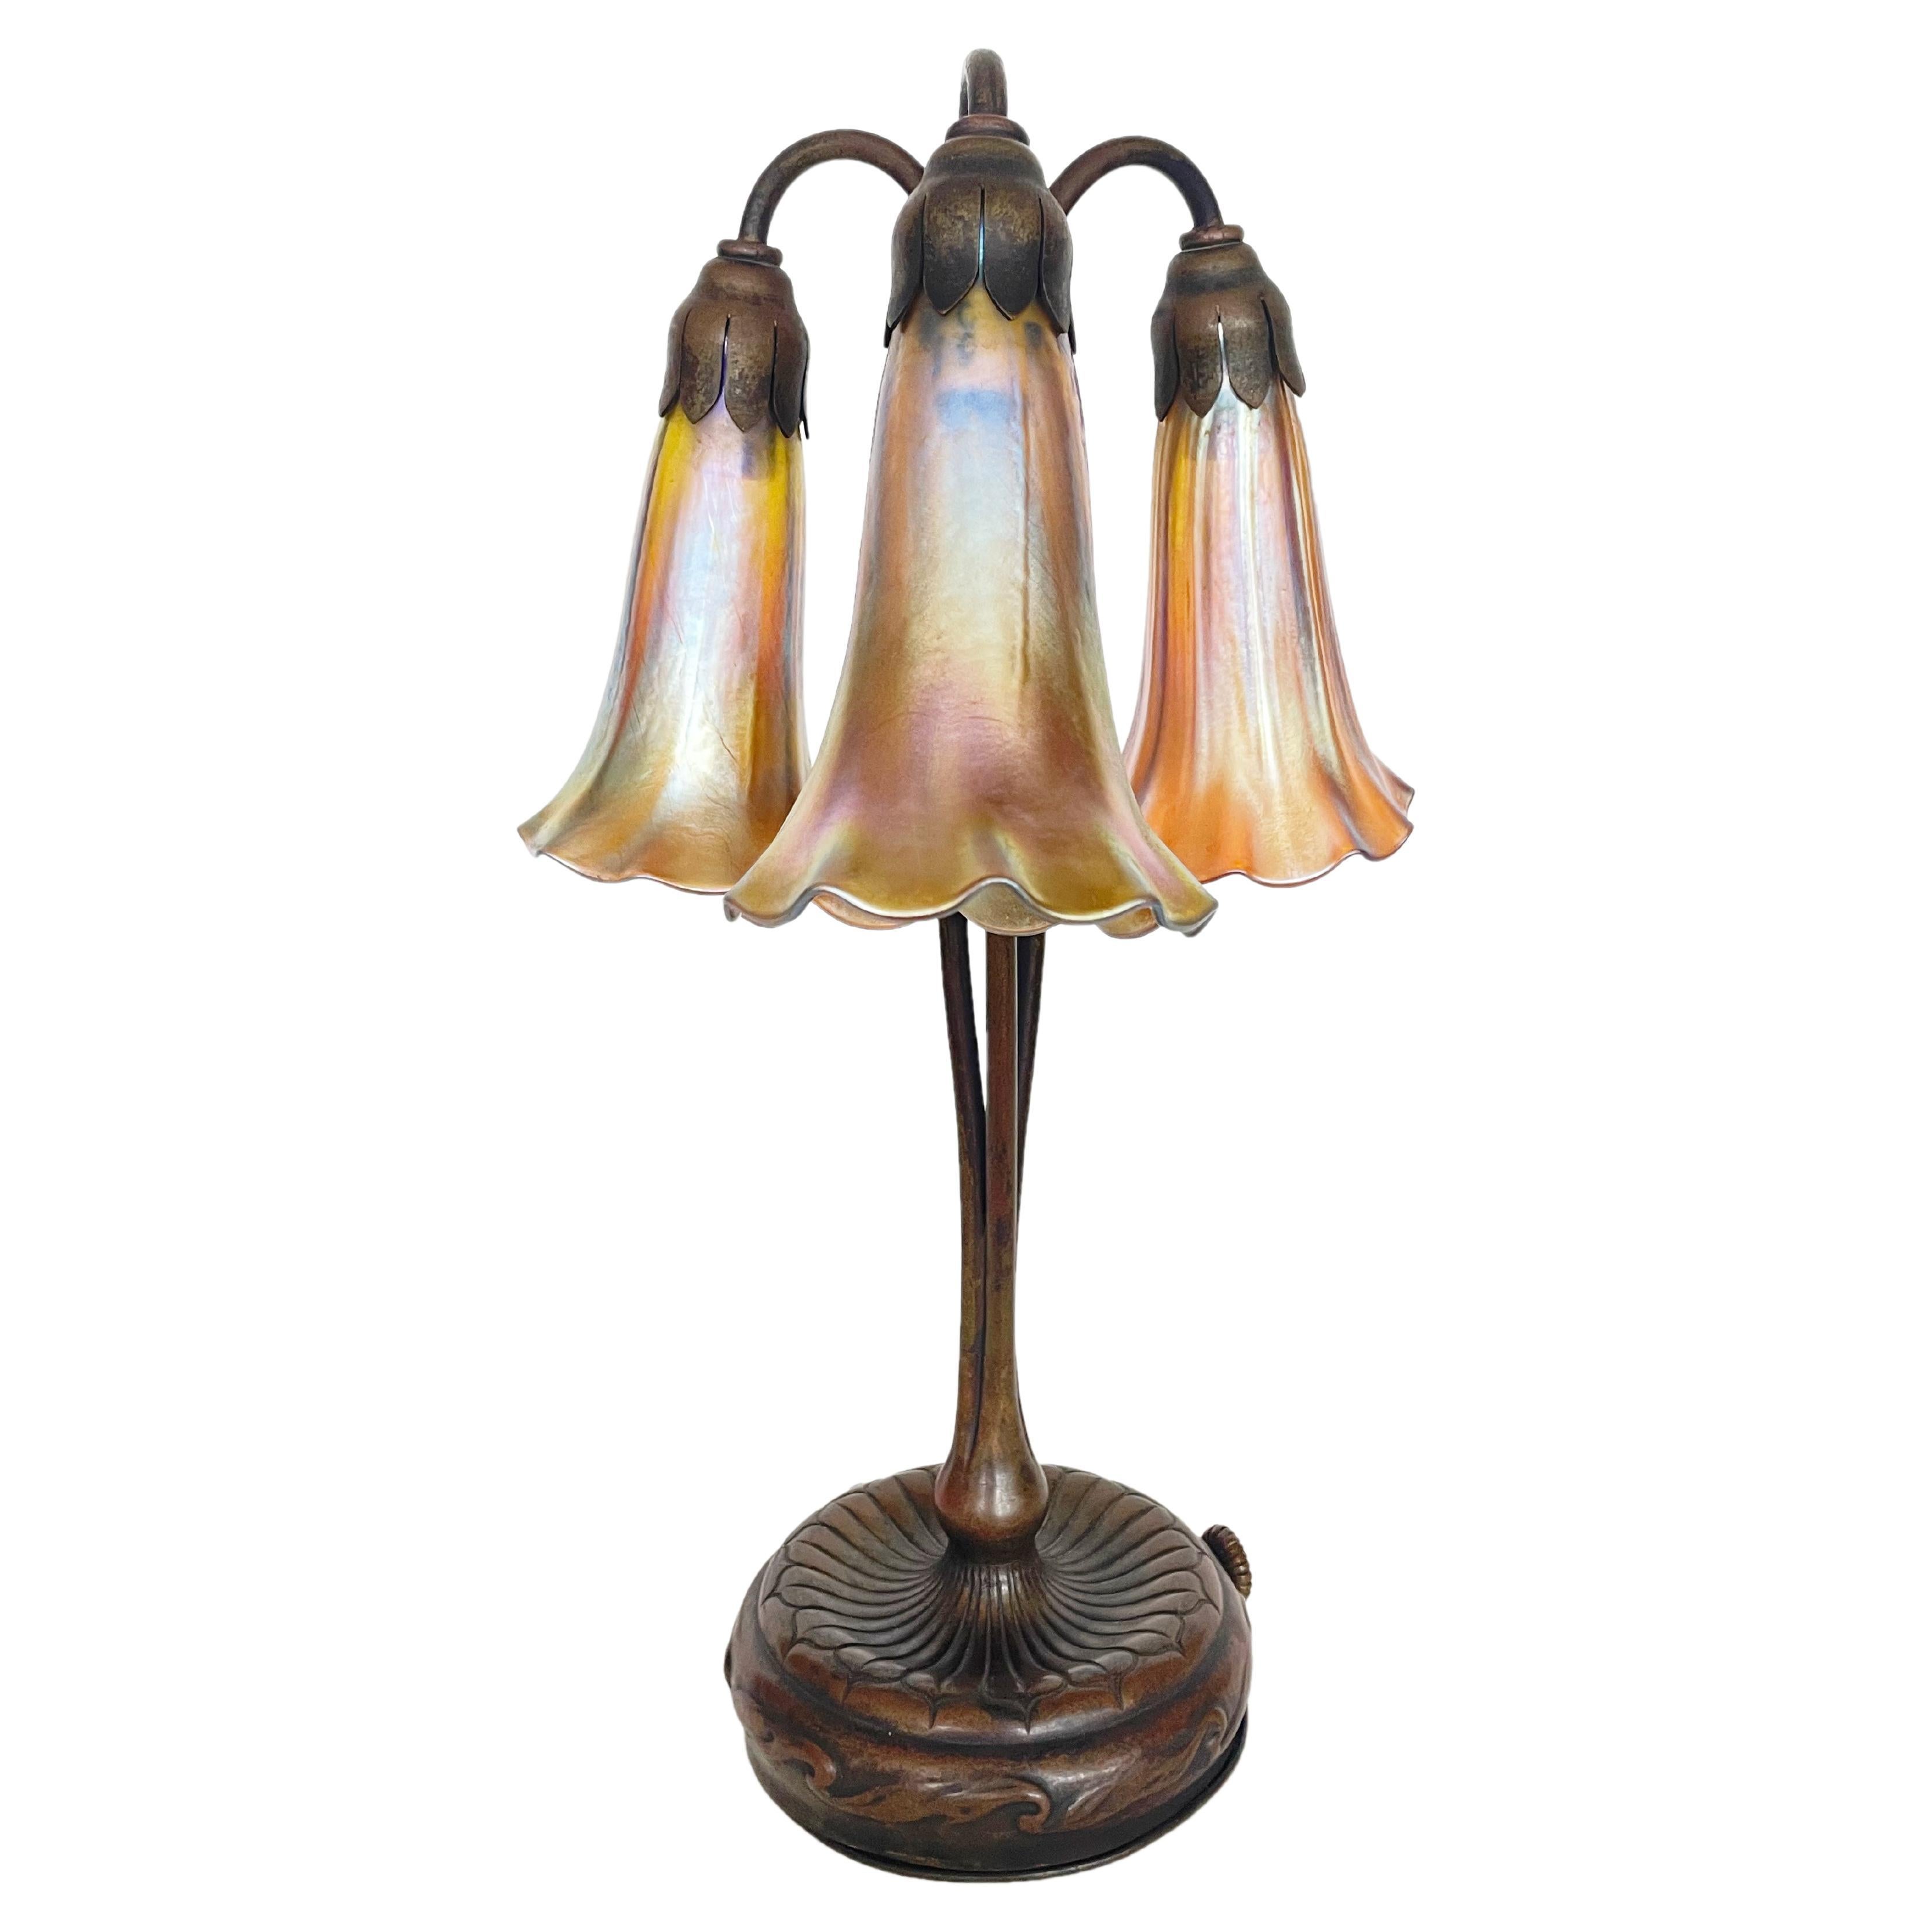 American Early 20th Century Art Nouveau Shower Lily Desk Lamp by, Tiffany Studios